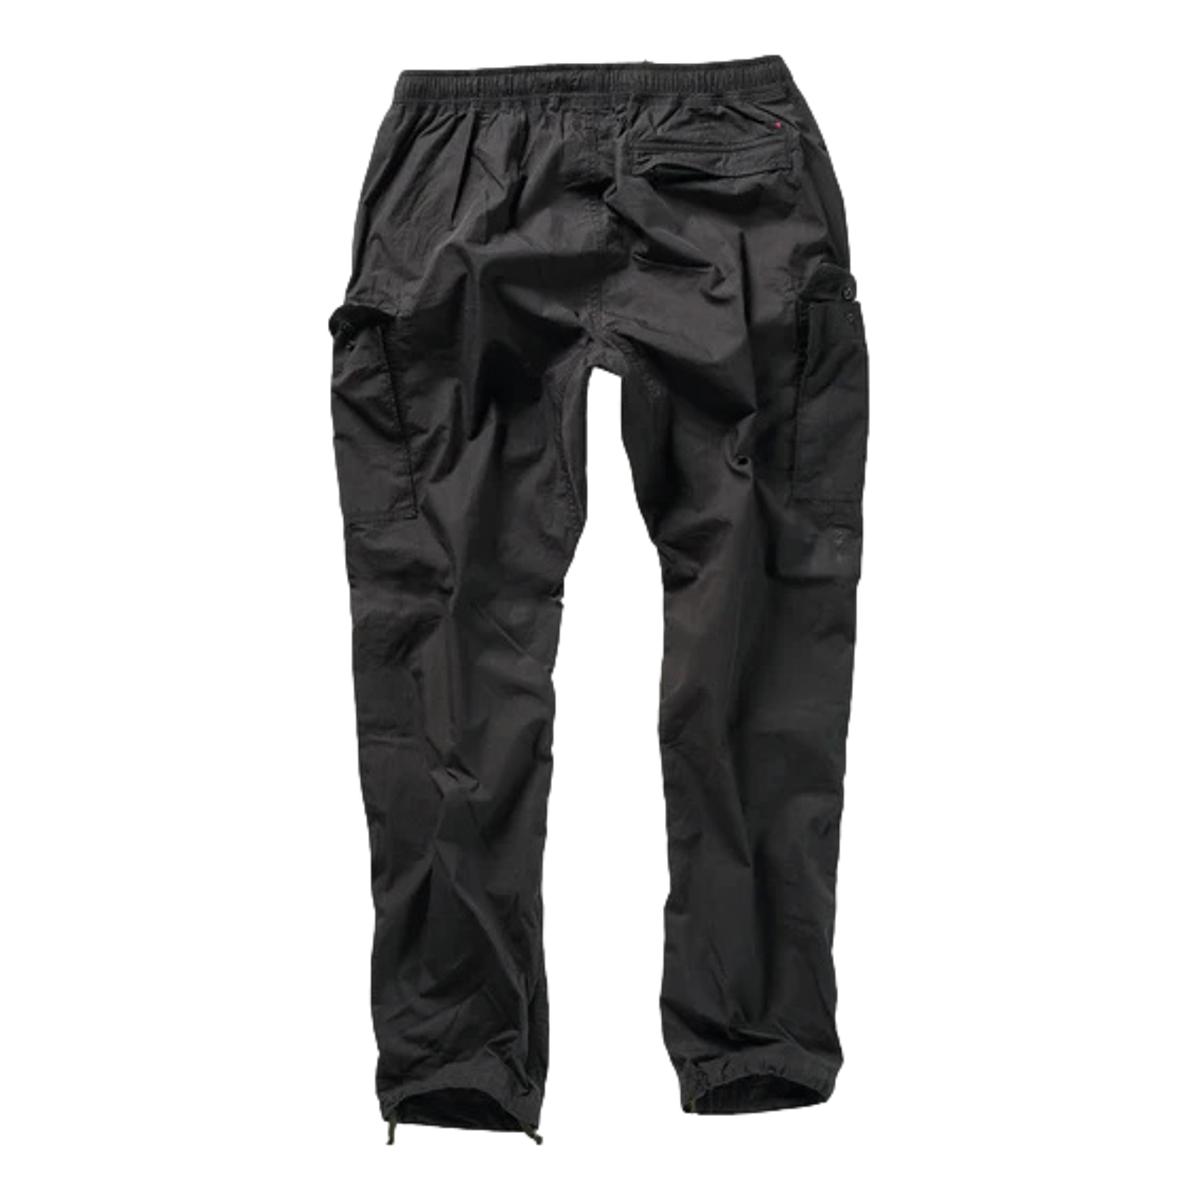 Commando Faux Leather Paperbag Pants Review: A Spring 2021 Essential